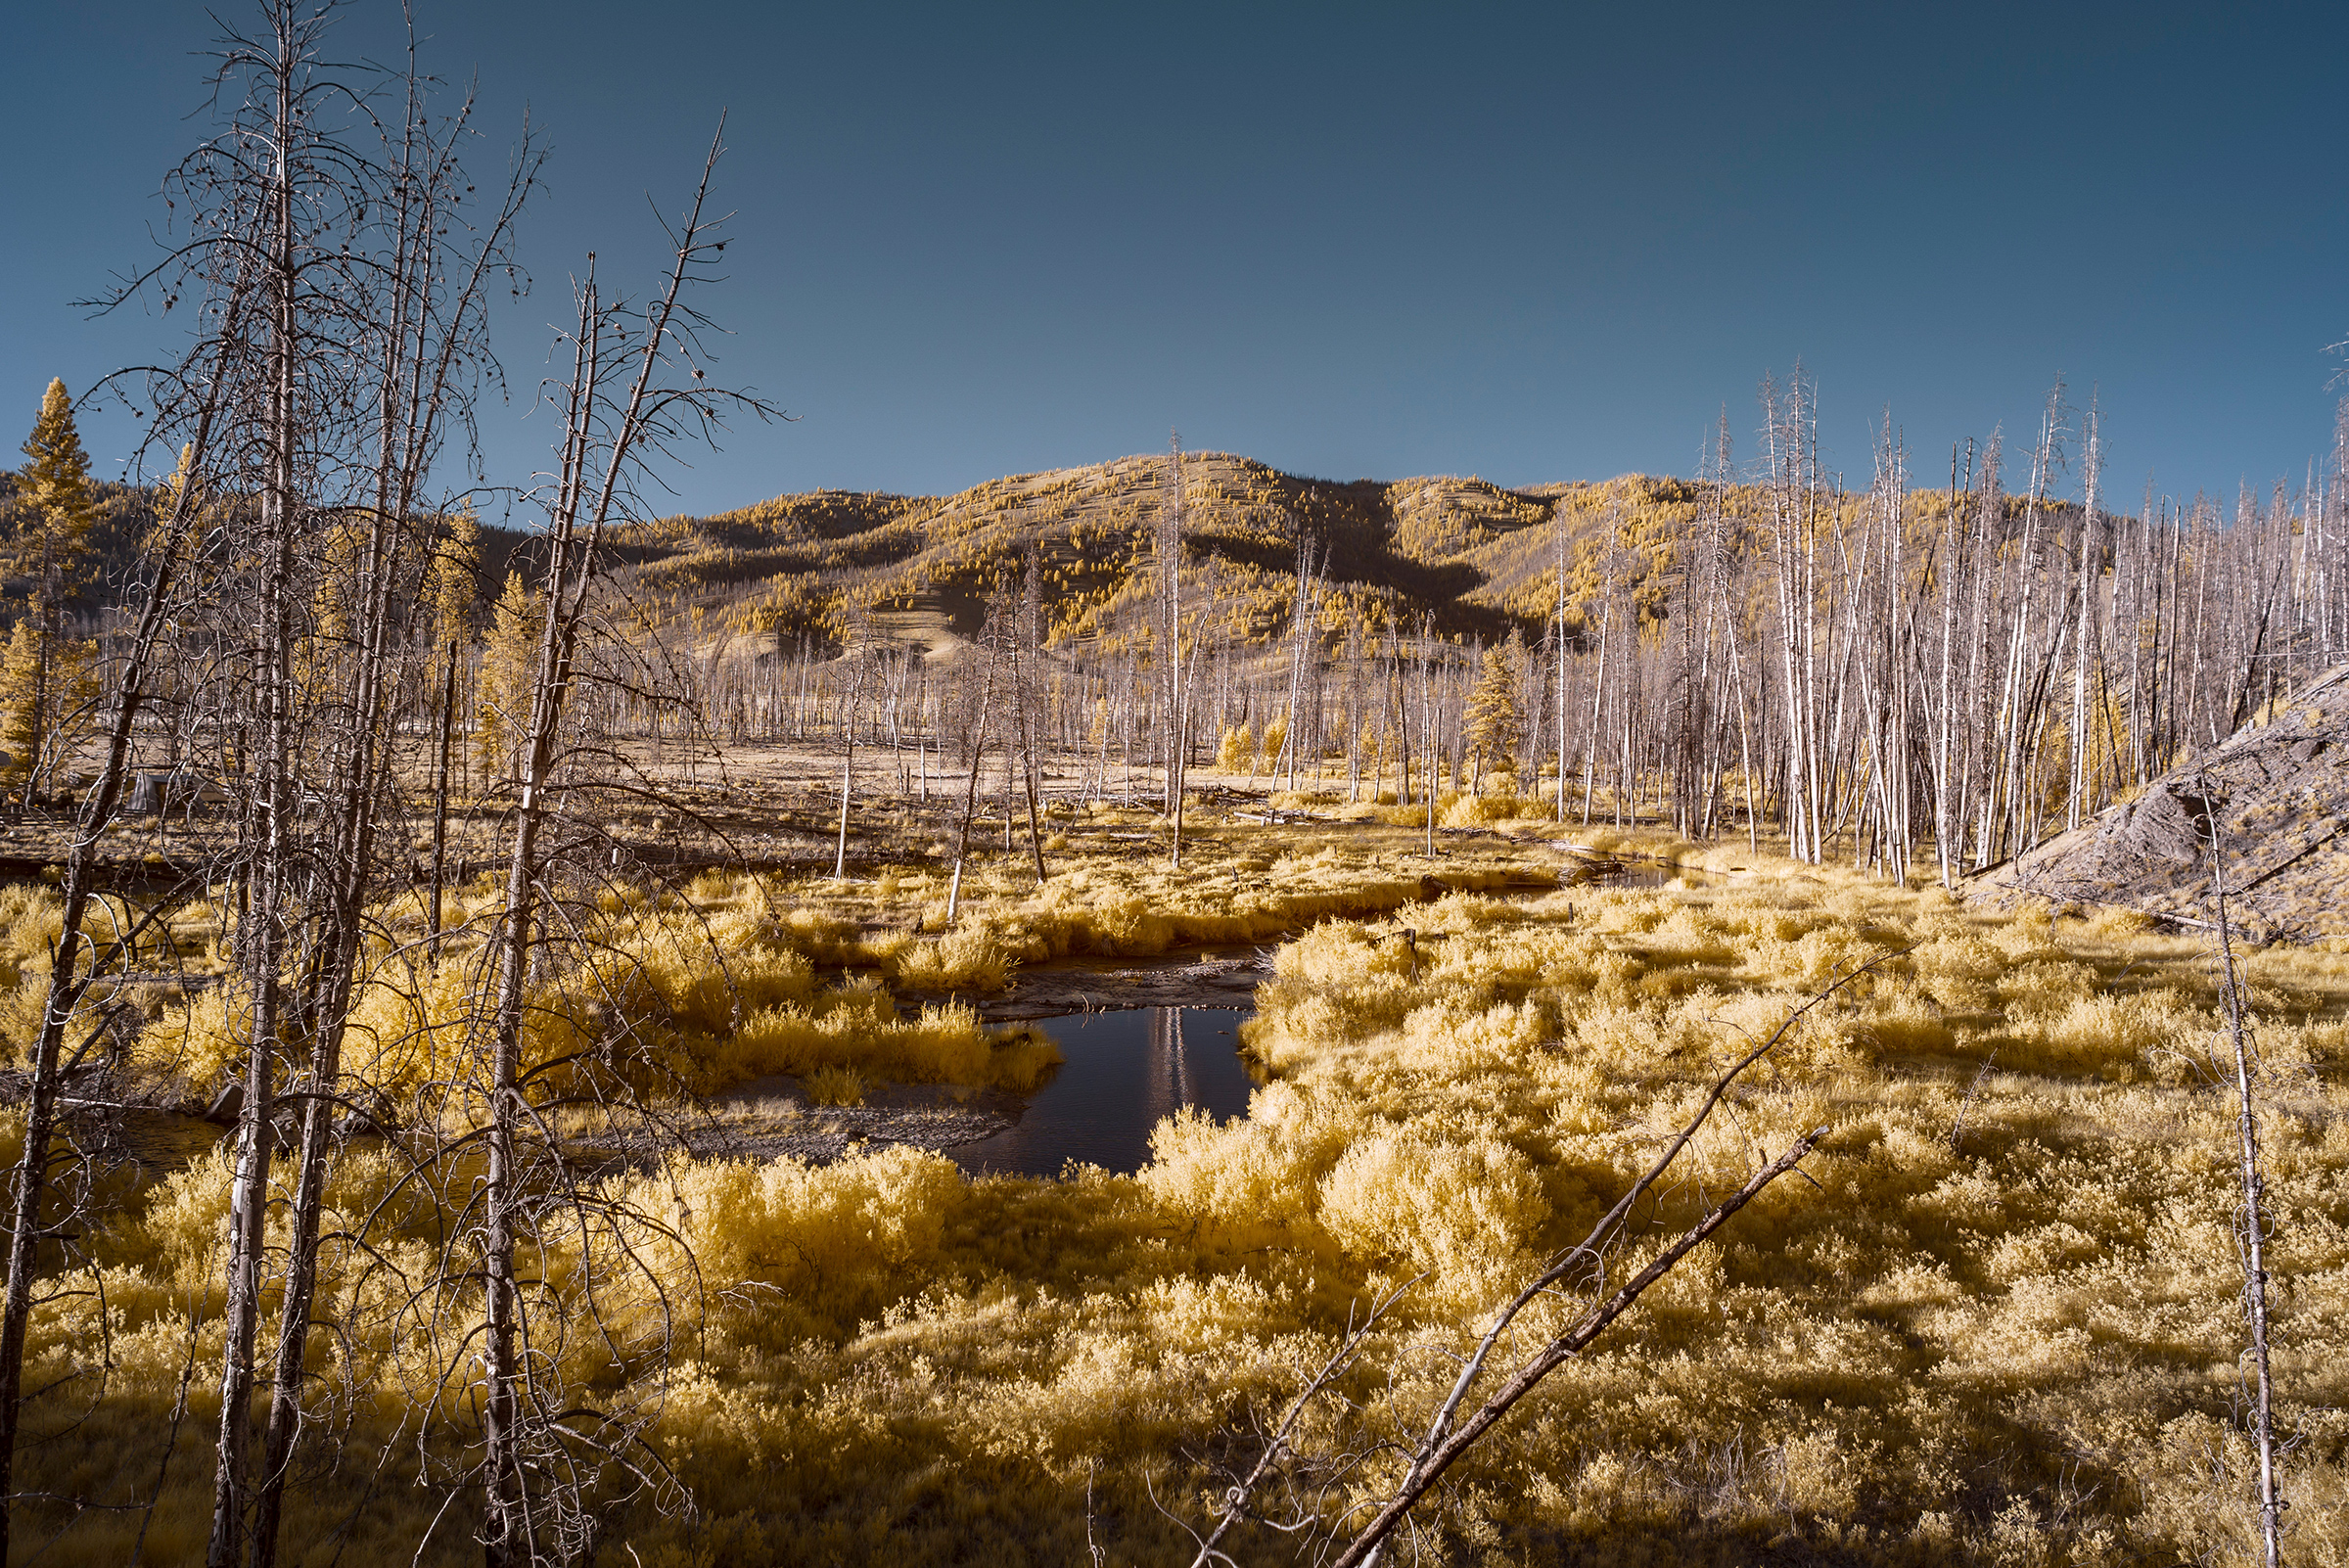 A salmon spawning habitat on the Salmon River, taken with an infrared camera during the searing middle-of-the-day heat with the vibrant yellow coloring showing signs of life.